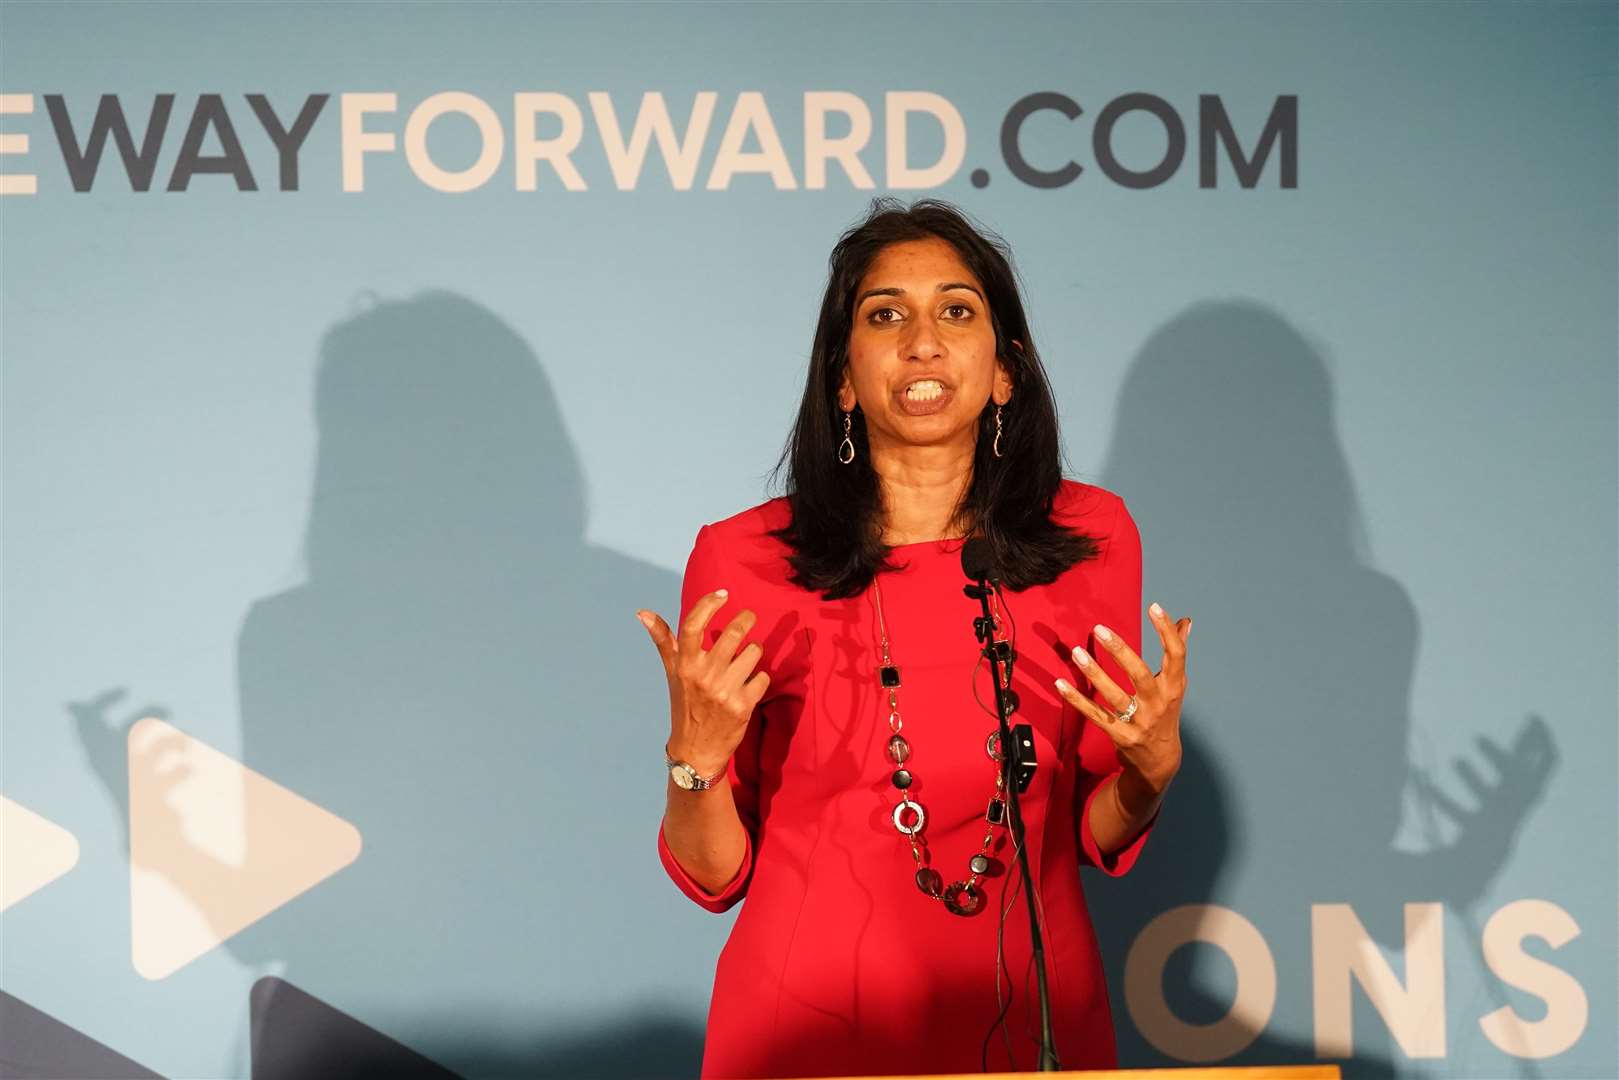 Suella Braverman’s bid for the Conservative leadership ended after the second round of balloting, but saw her become home secretary under winner Liz Truss (Stefan Rousseau/PA)